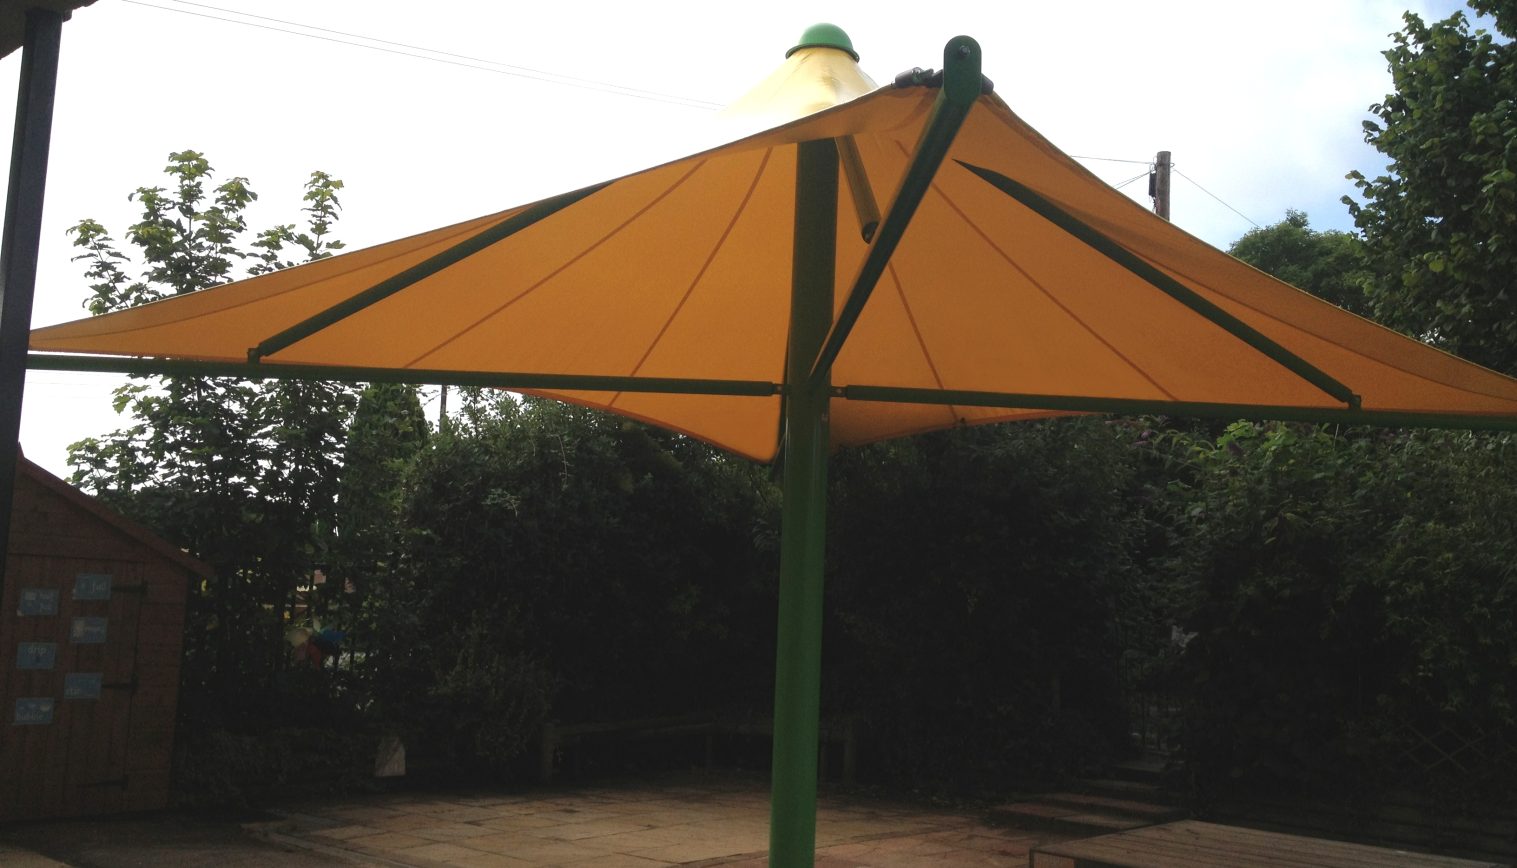 Bishop Tufnell CE Infant School – First Tensile Umbrella Canopy Installation